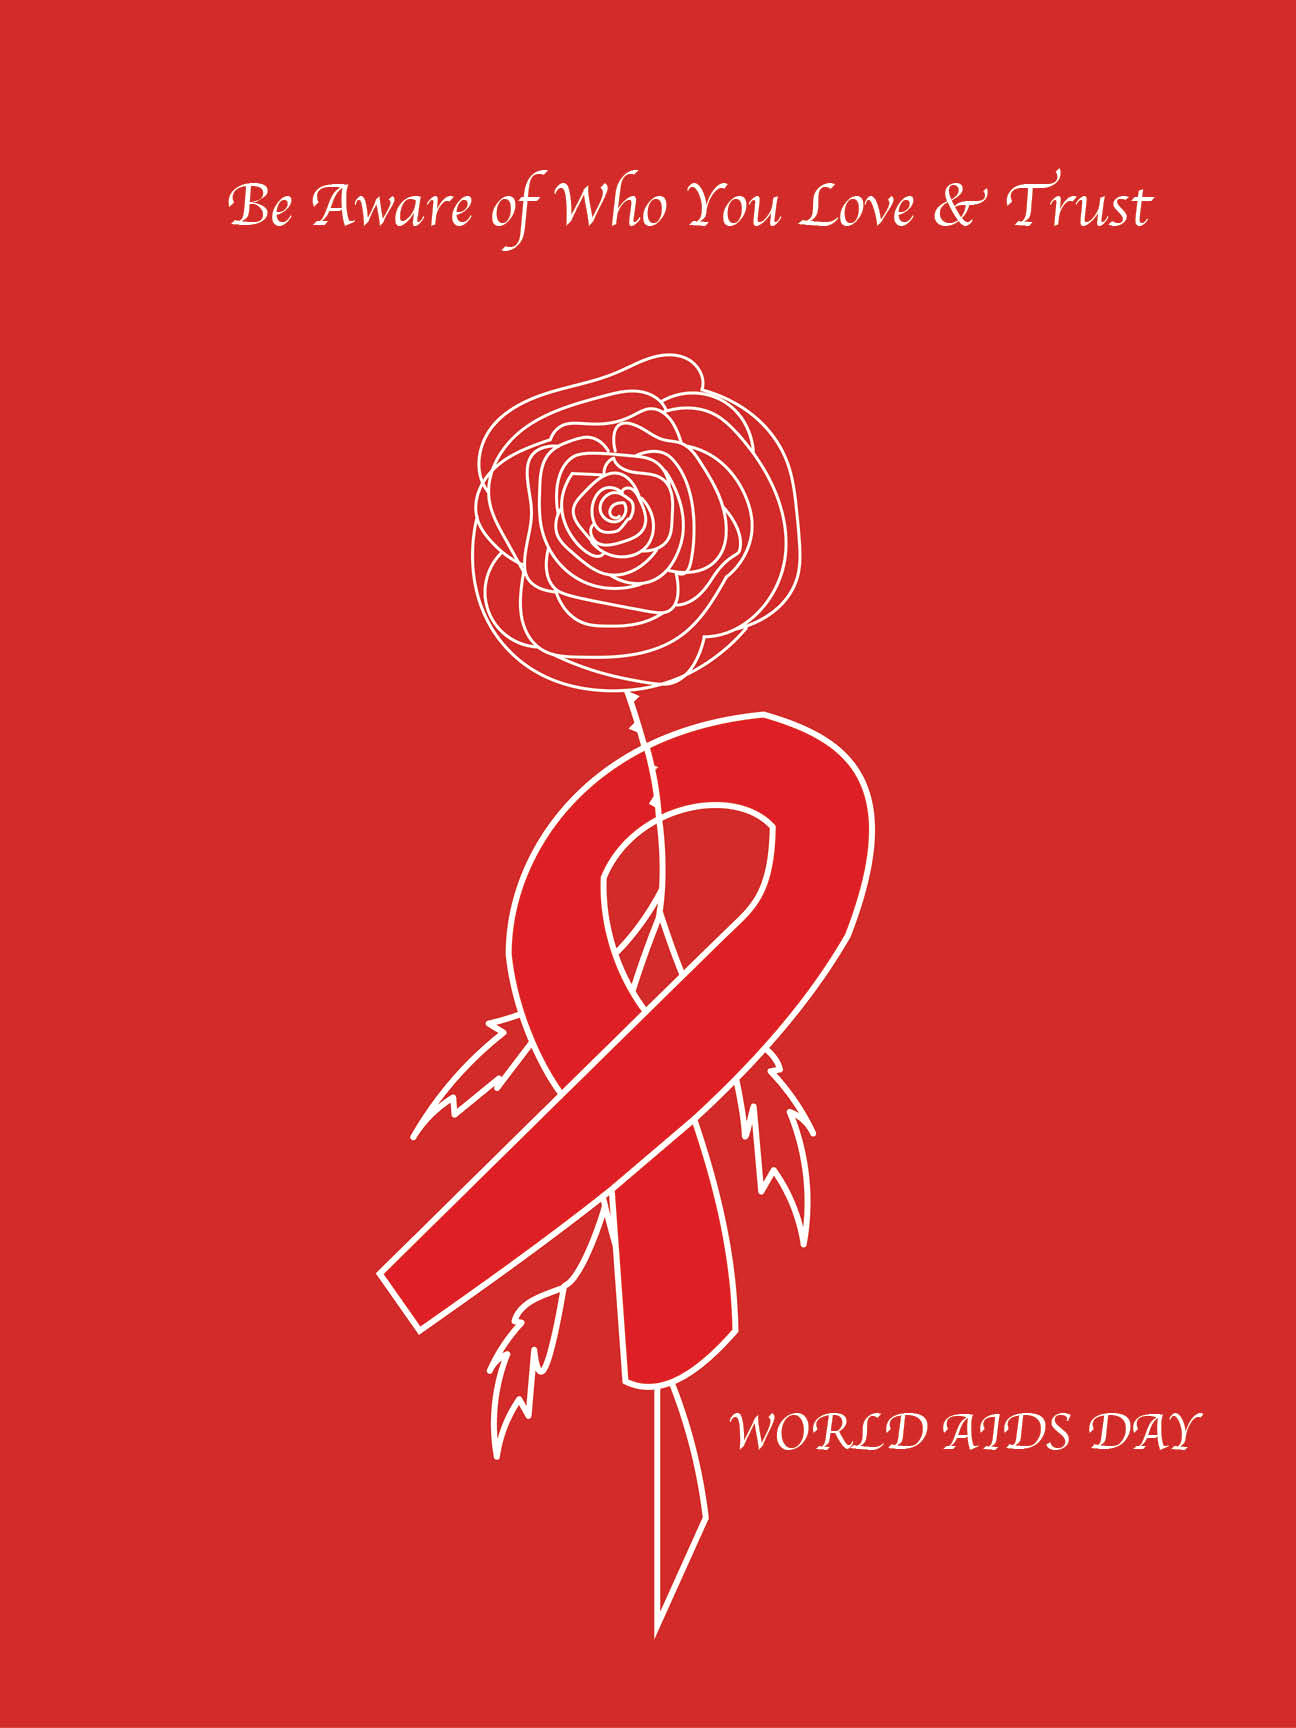 Top text: Be Aware of Who You Love & Trust. Illustration of rose that is wrapped by a red ribbon. Bottom text: "WORLD AIDS DAY"